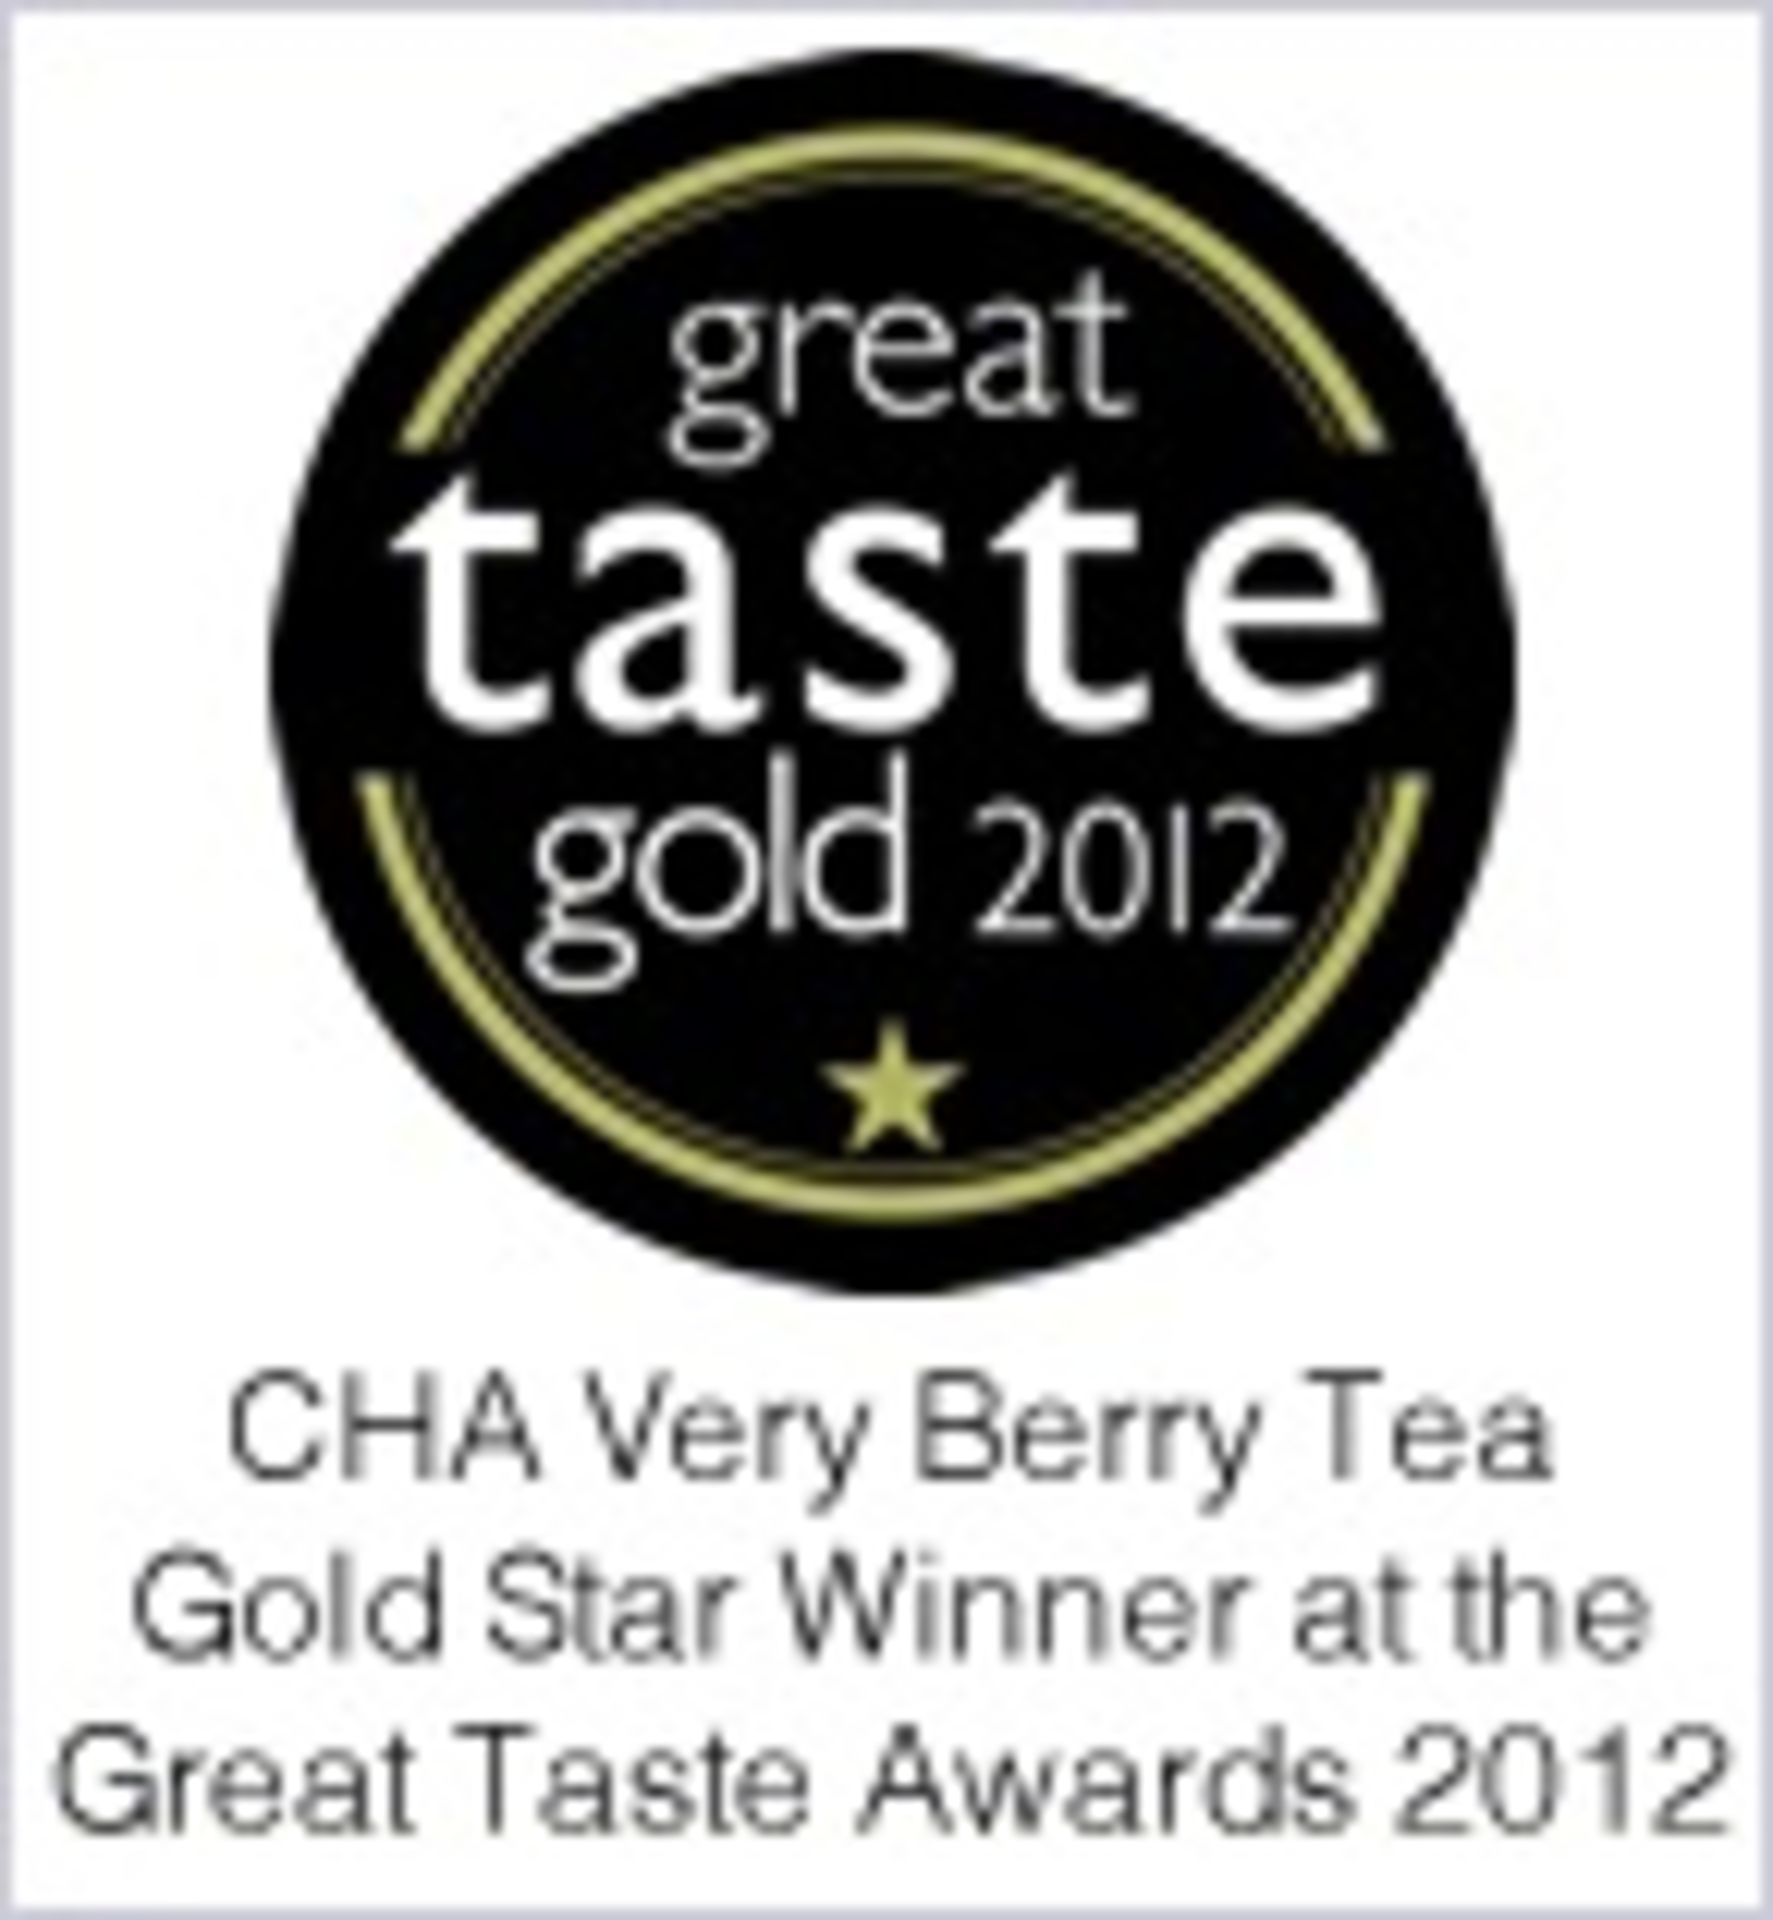 12 x Tins of CHA Organic Tea - PURE BLACK - 100% Natural and Organic - Includes 12 Tins of 25 - Image 2 of 3